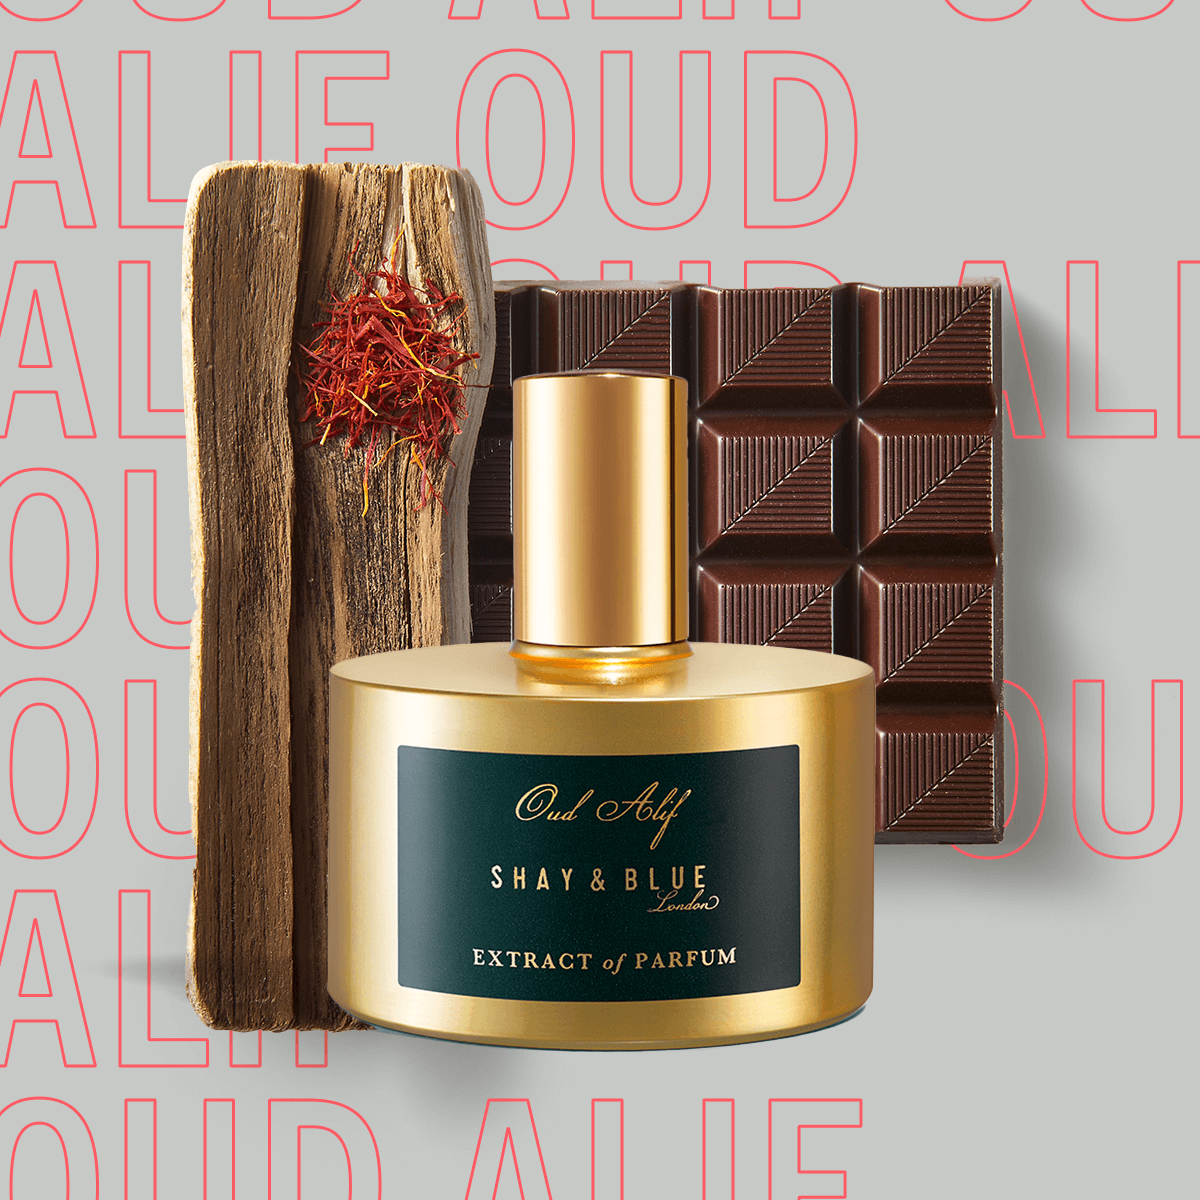 Oud Alif Extract of Parfum 60ml | The finest oud agarwood spiked with chocolat noir, saffron and dark patchouli. | Clean All Gender Fragrance | Shay & Blue